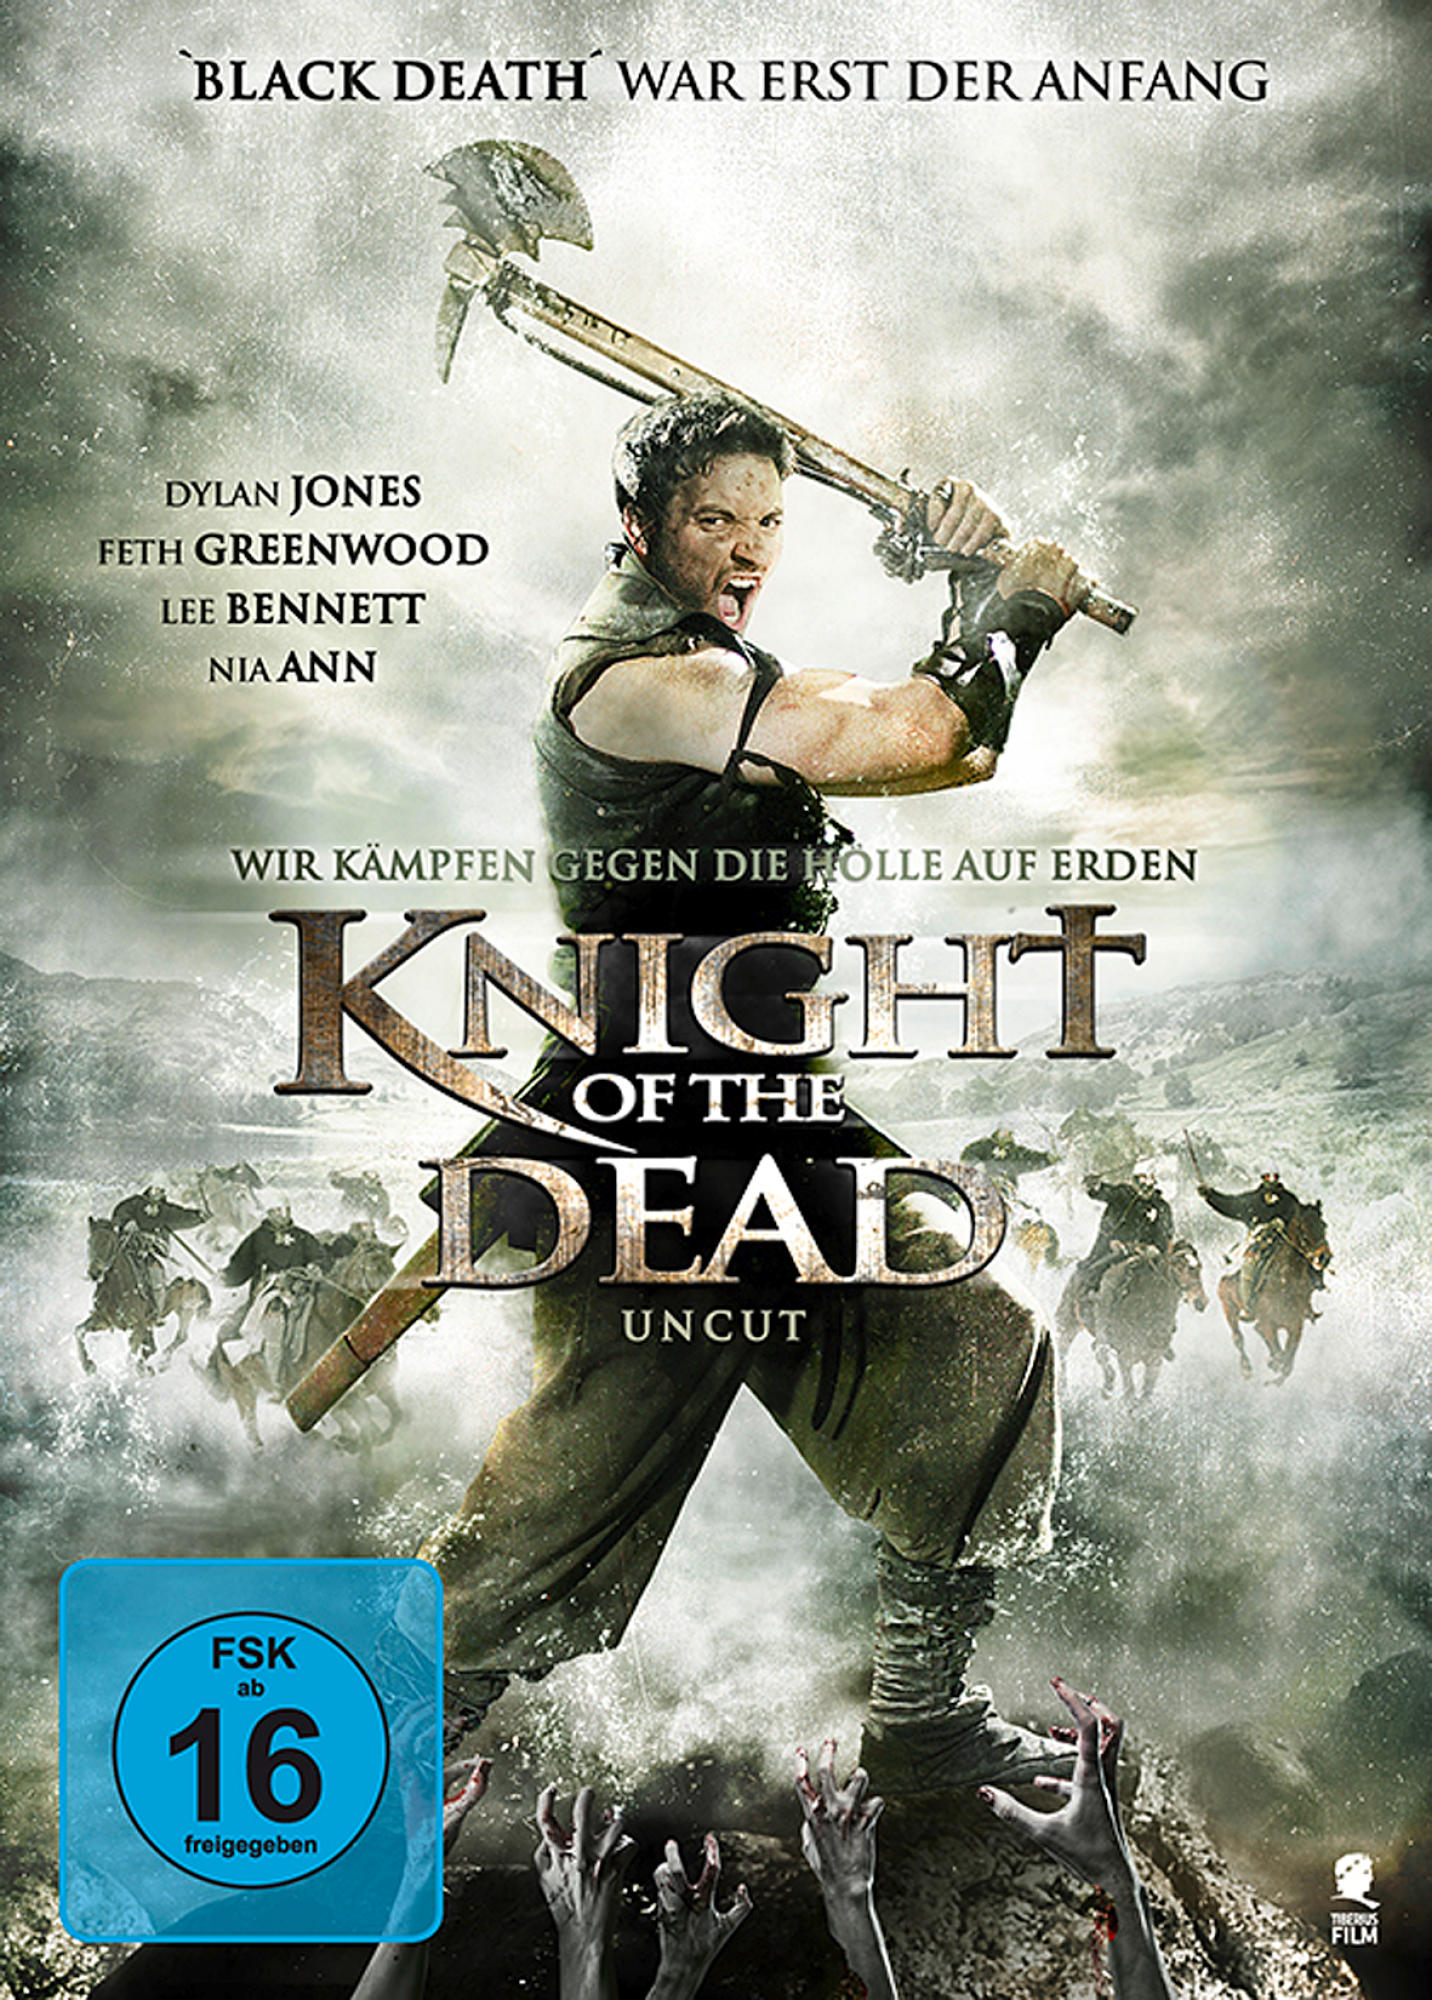 the of DVD Knight Dead